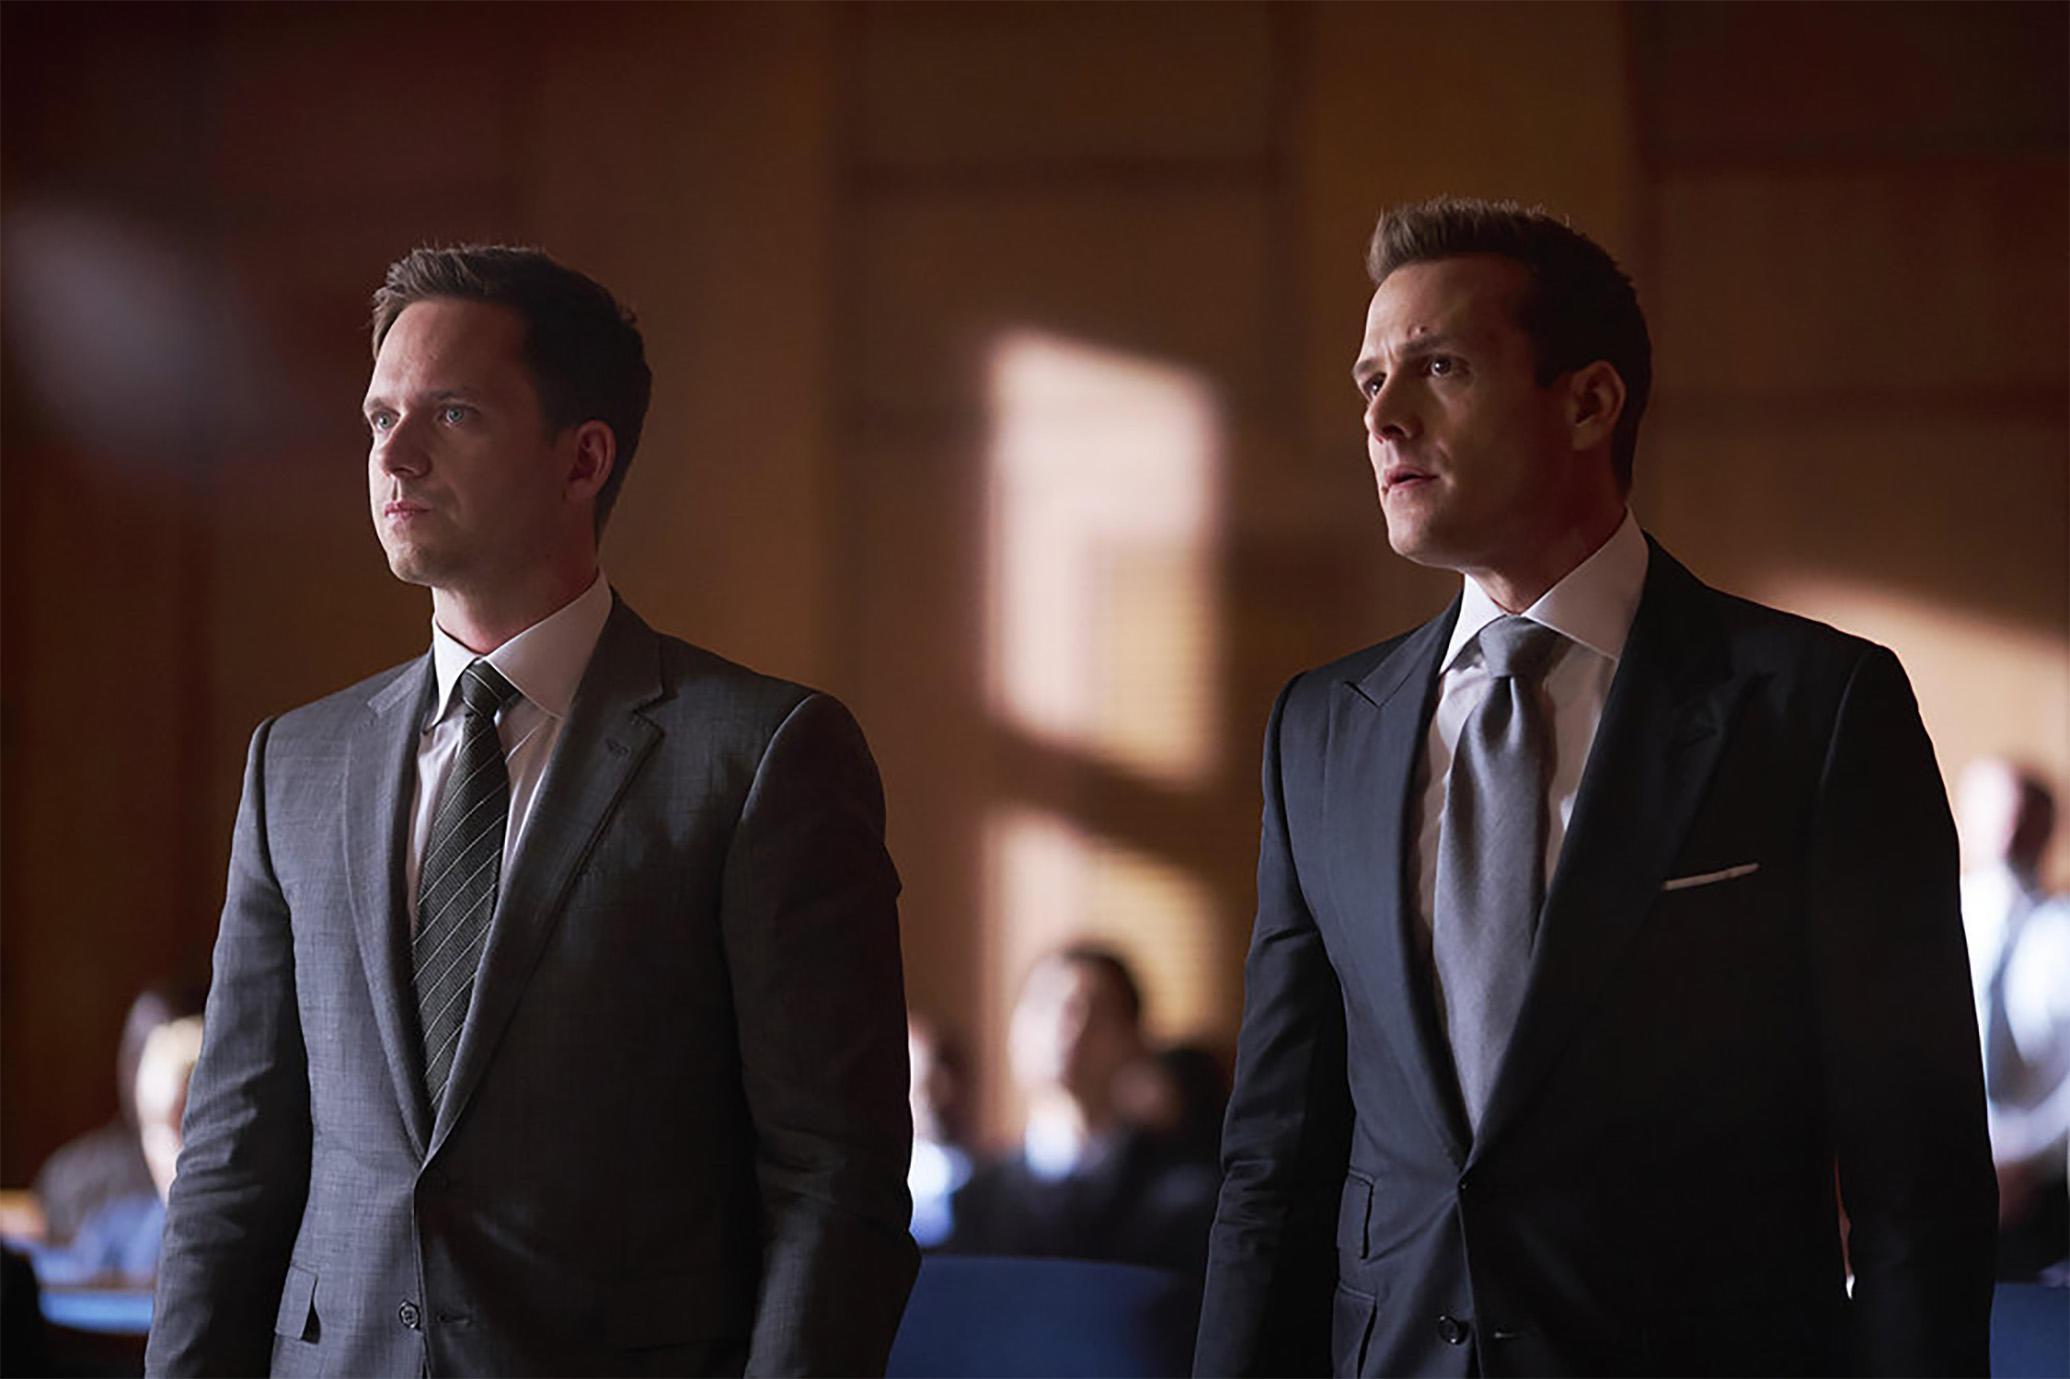 Where to Stream Suits?